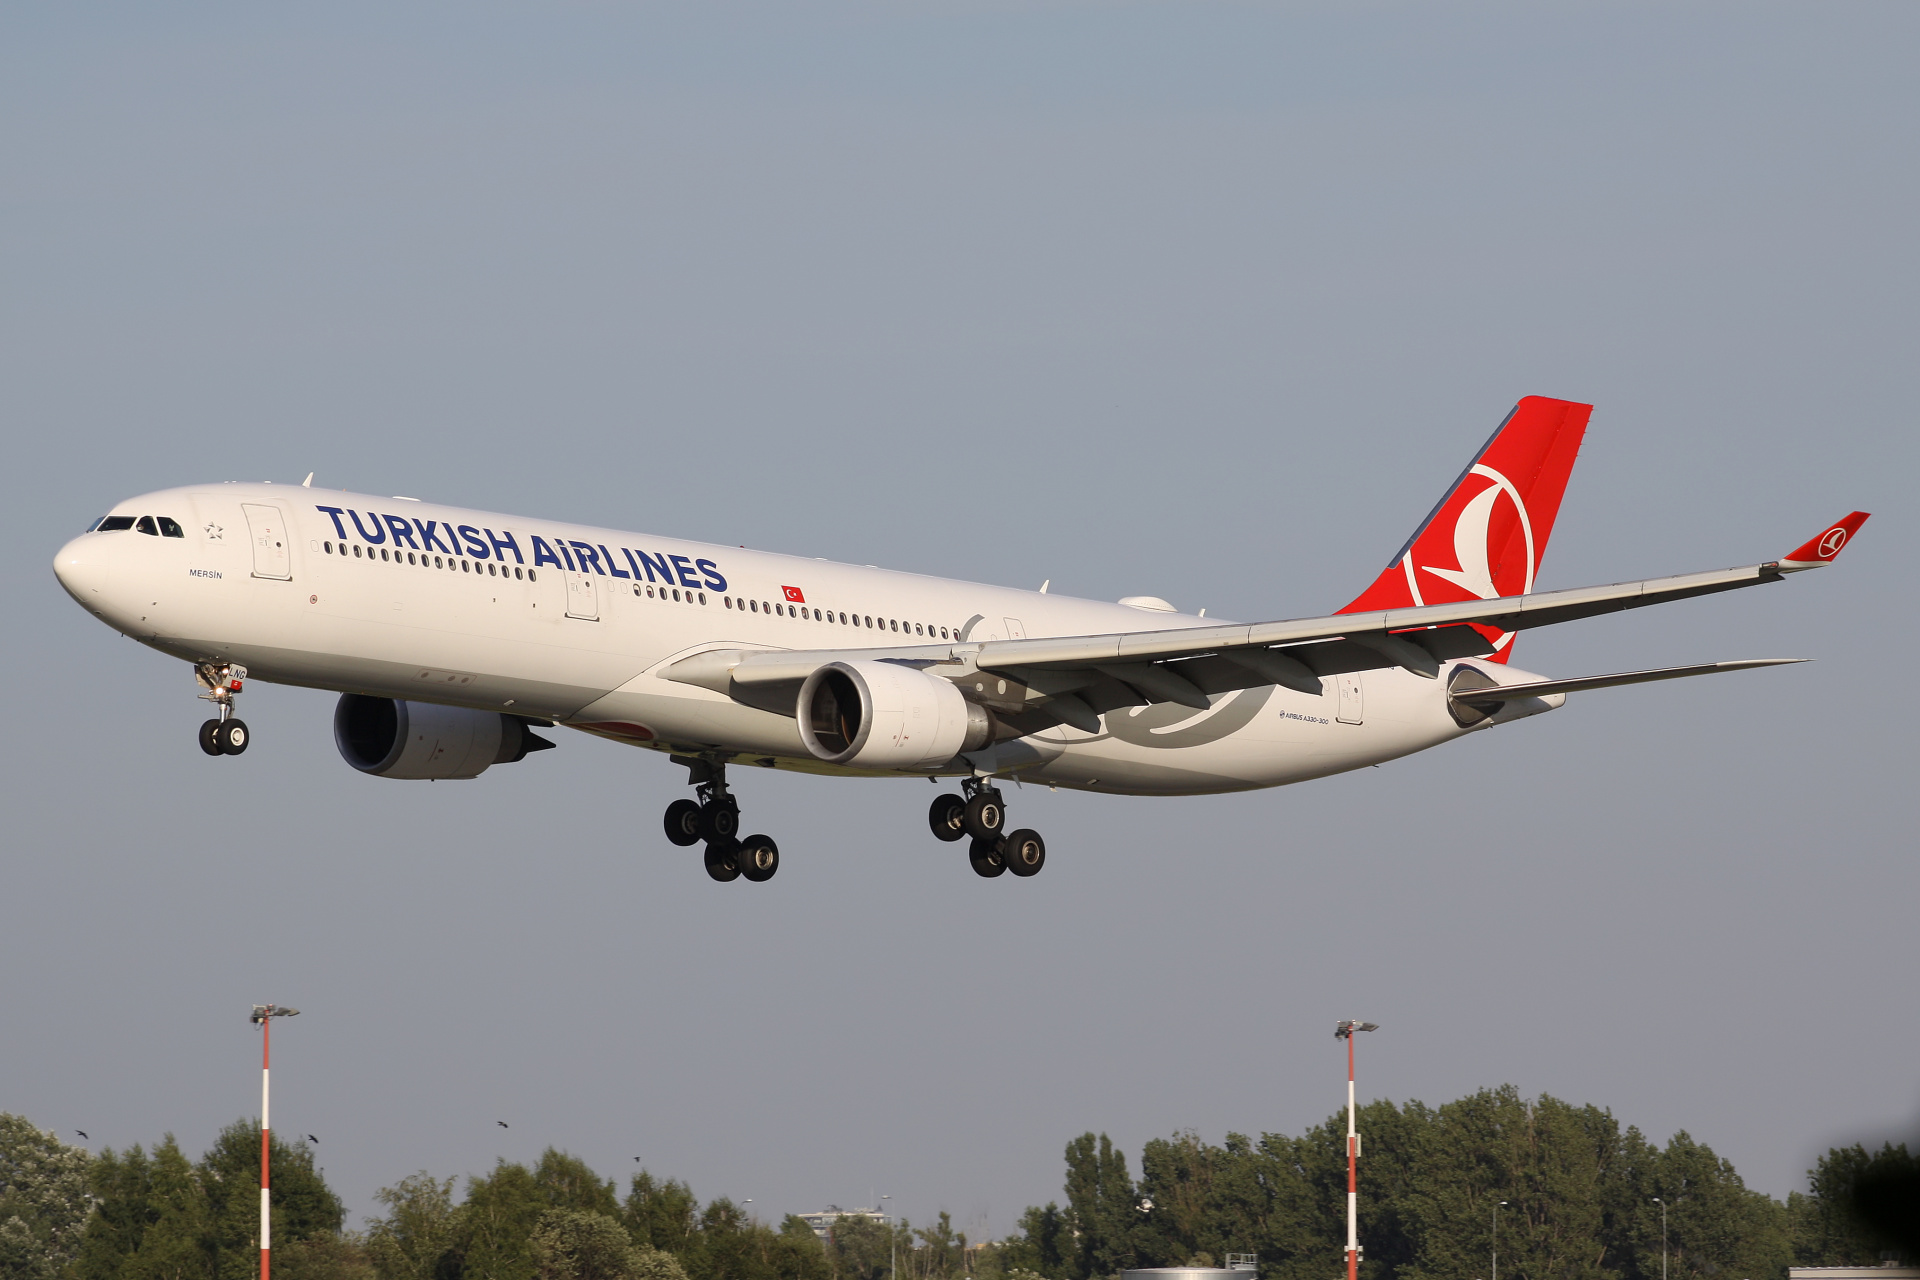 TC-LNG (Aircraft » EPWA Spotting » Airbus A330-300 » THY Turkish Airlines)